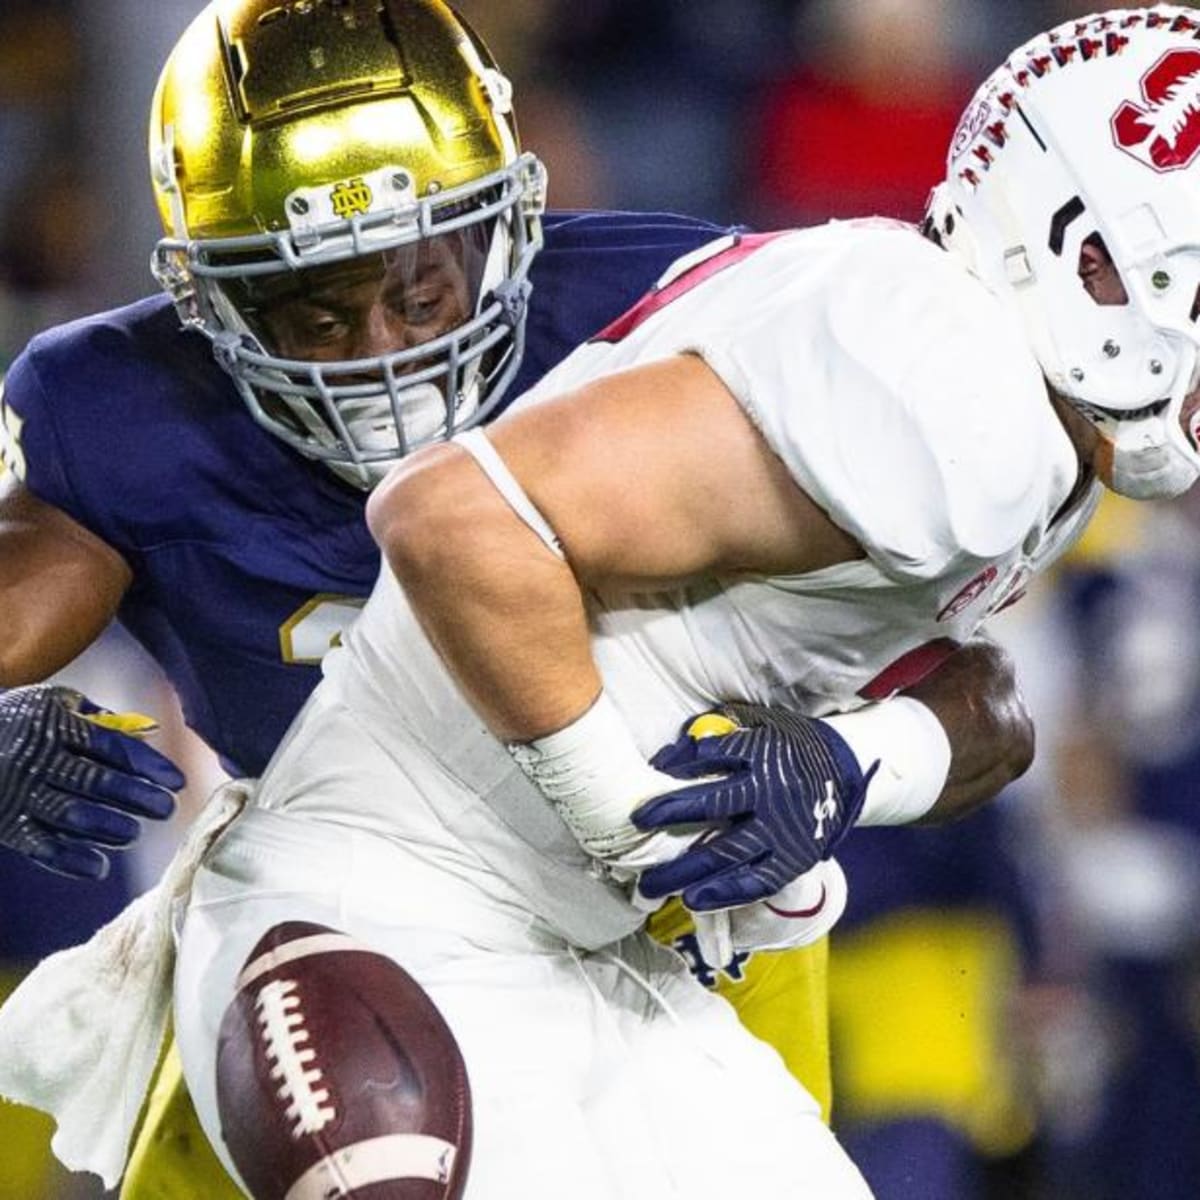 Notre Dame football game tonight: Notre Dame at Stanford injury